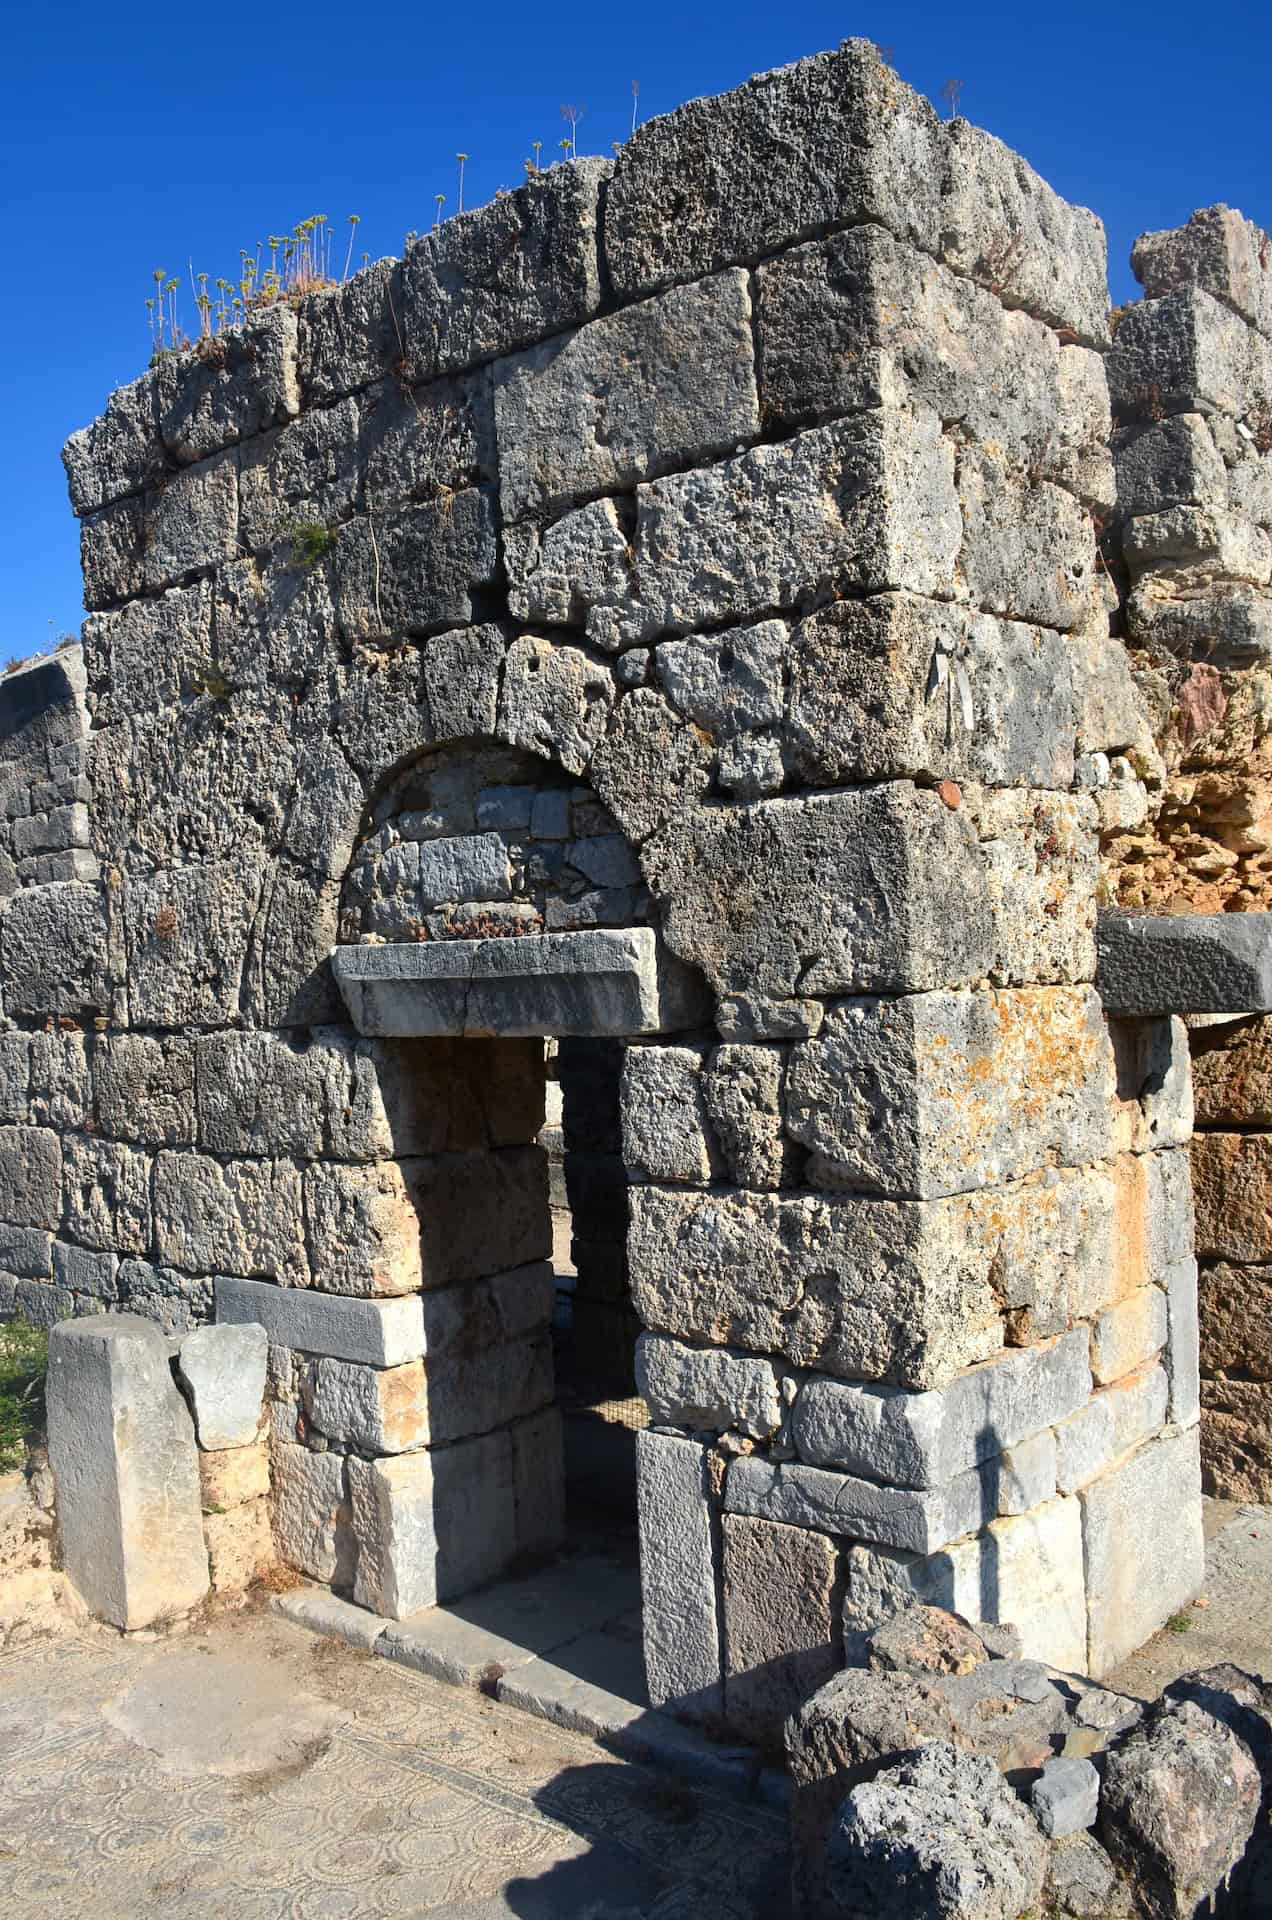 Entrance to the right aisle of the Domed Church at the Palaestra Terrace at Kaunos, Turkey